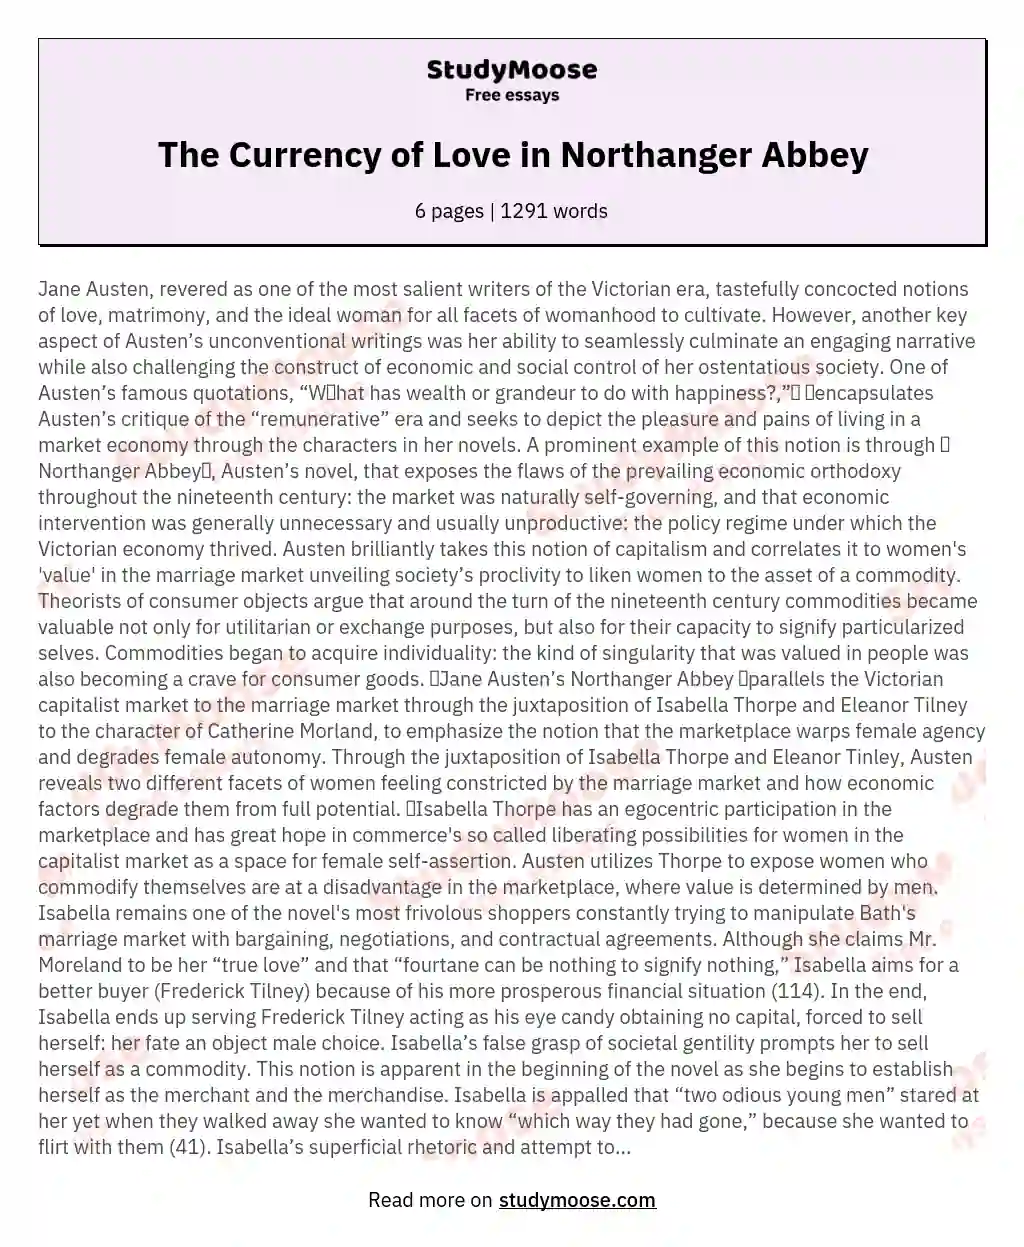 The Currency of Love in Northanger Abbey essay